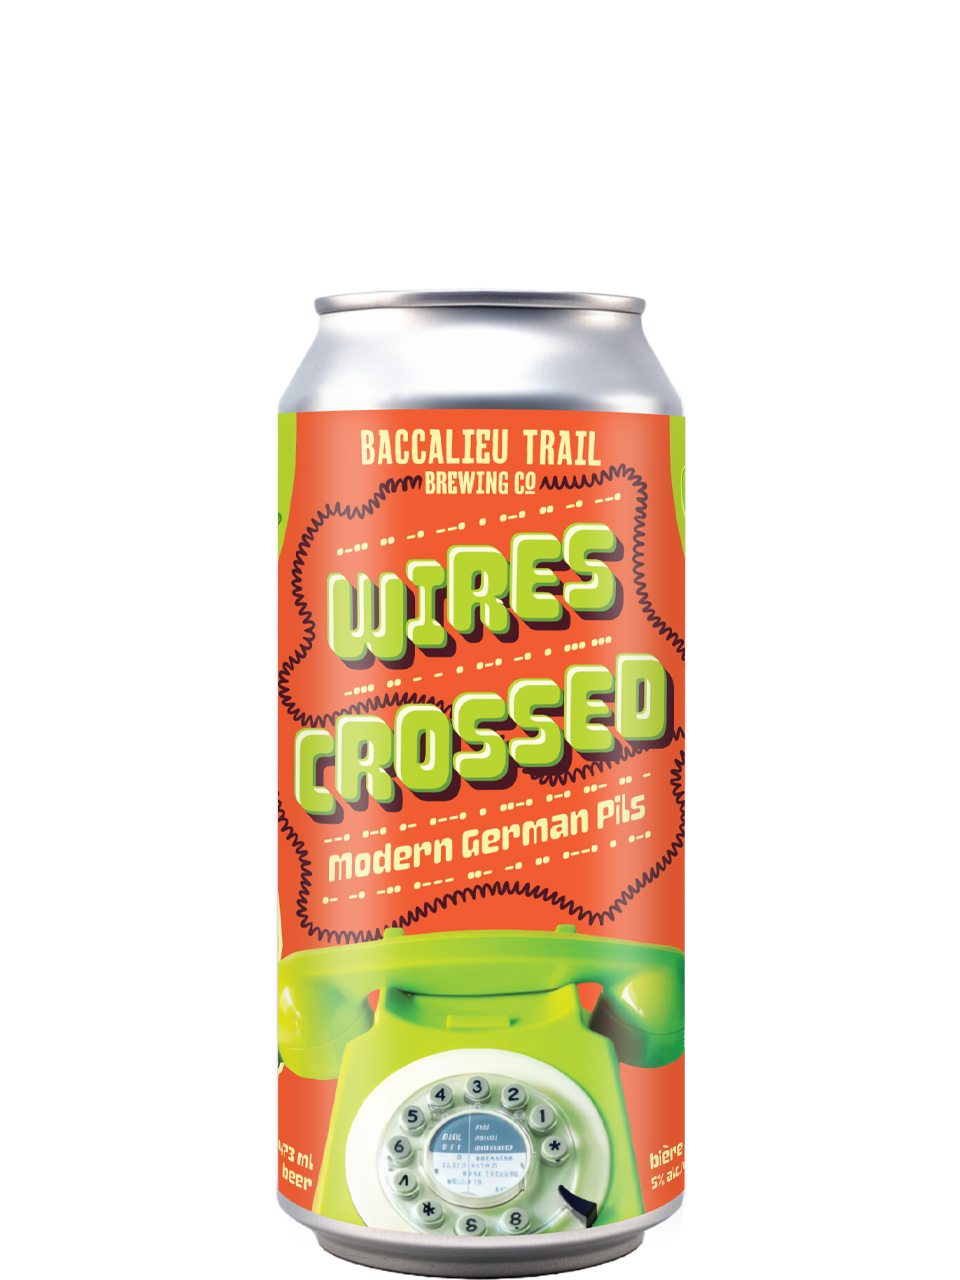 Baccalieu Trail Wires Crossed 473ml Can